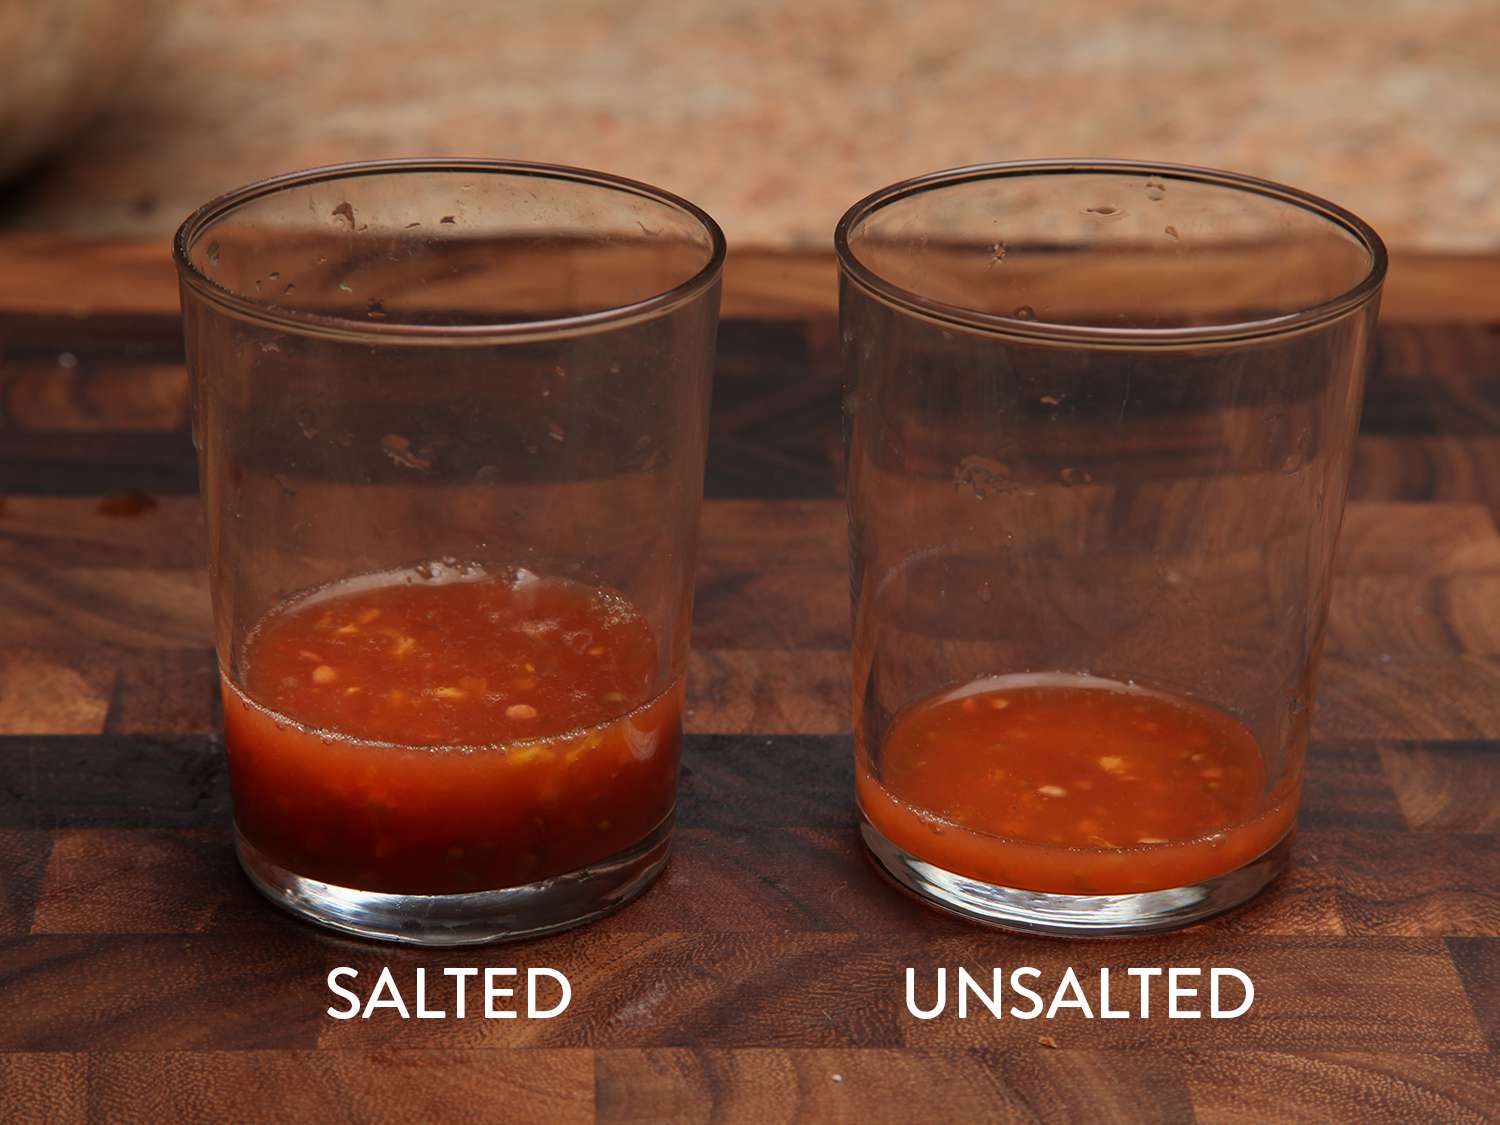 Two glasses showing the respective amounts of liquid drained from tomatoes that have been salted versus unsalted tomatoes